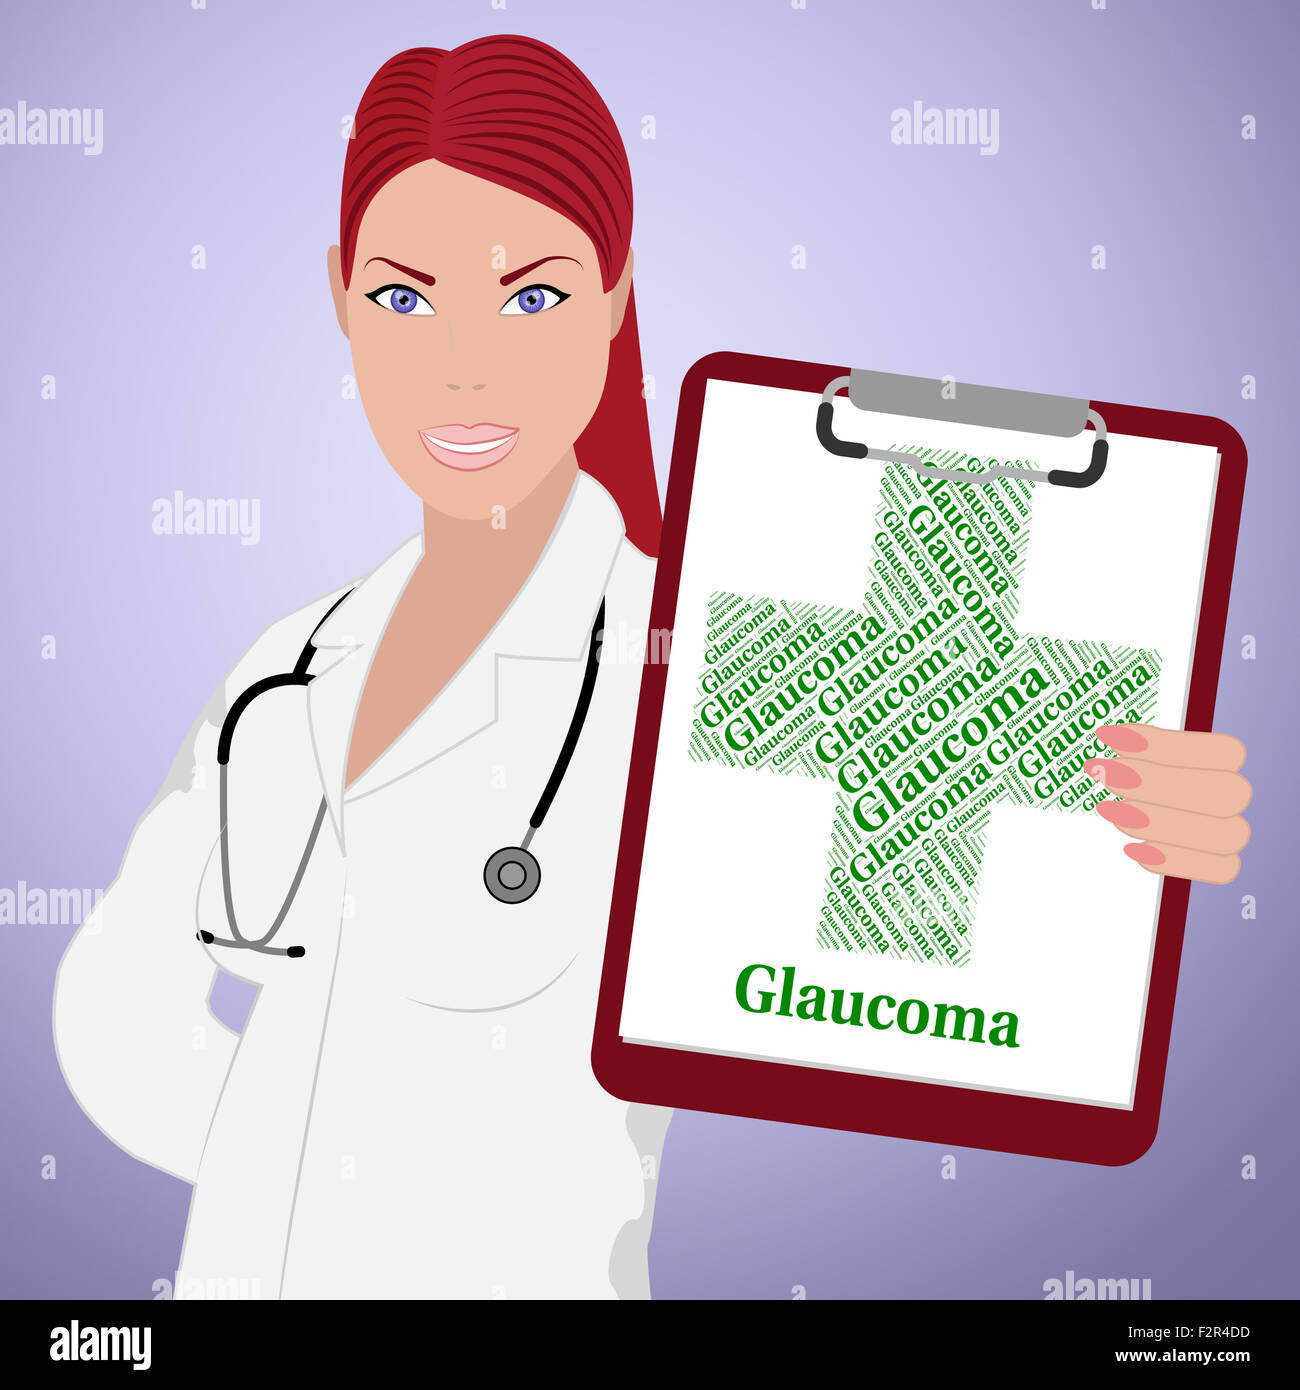 Glaucoma Word Representing Optic Nerve And Ailments Stock Photo